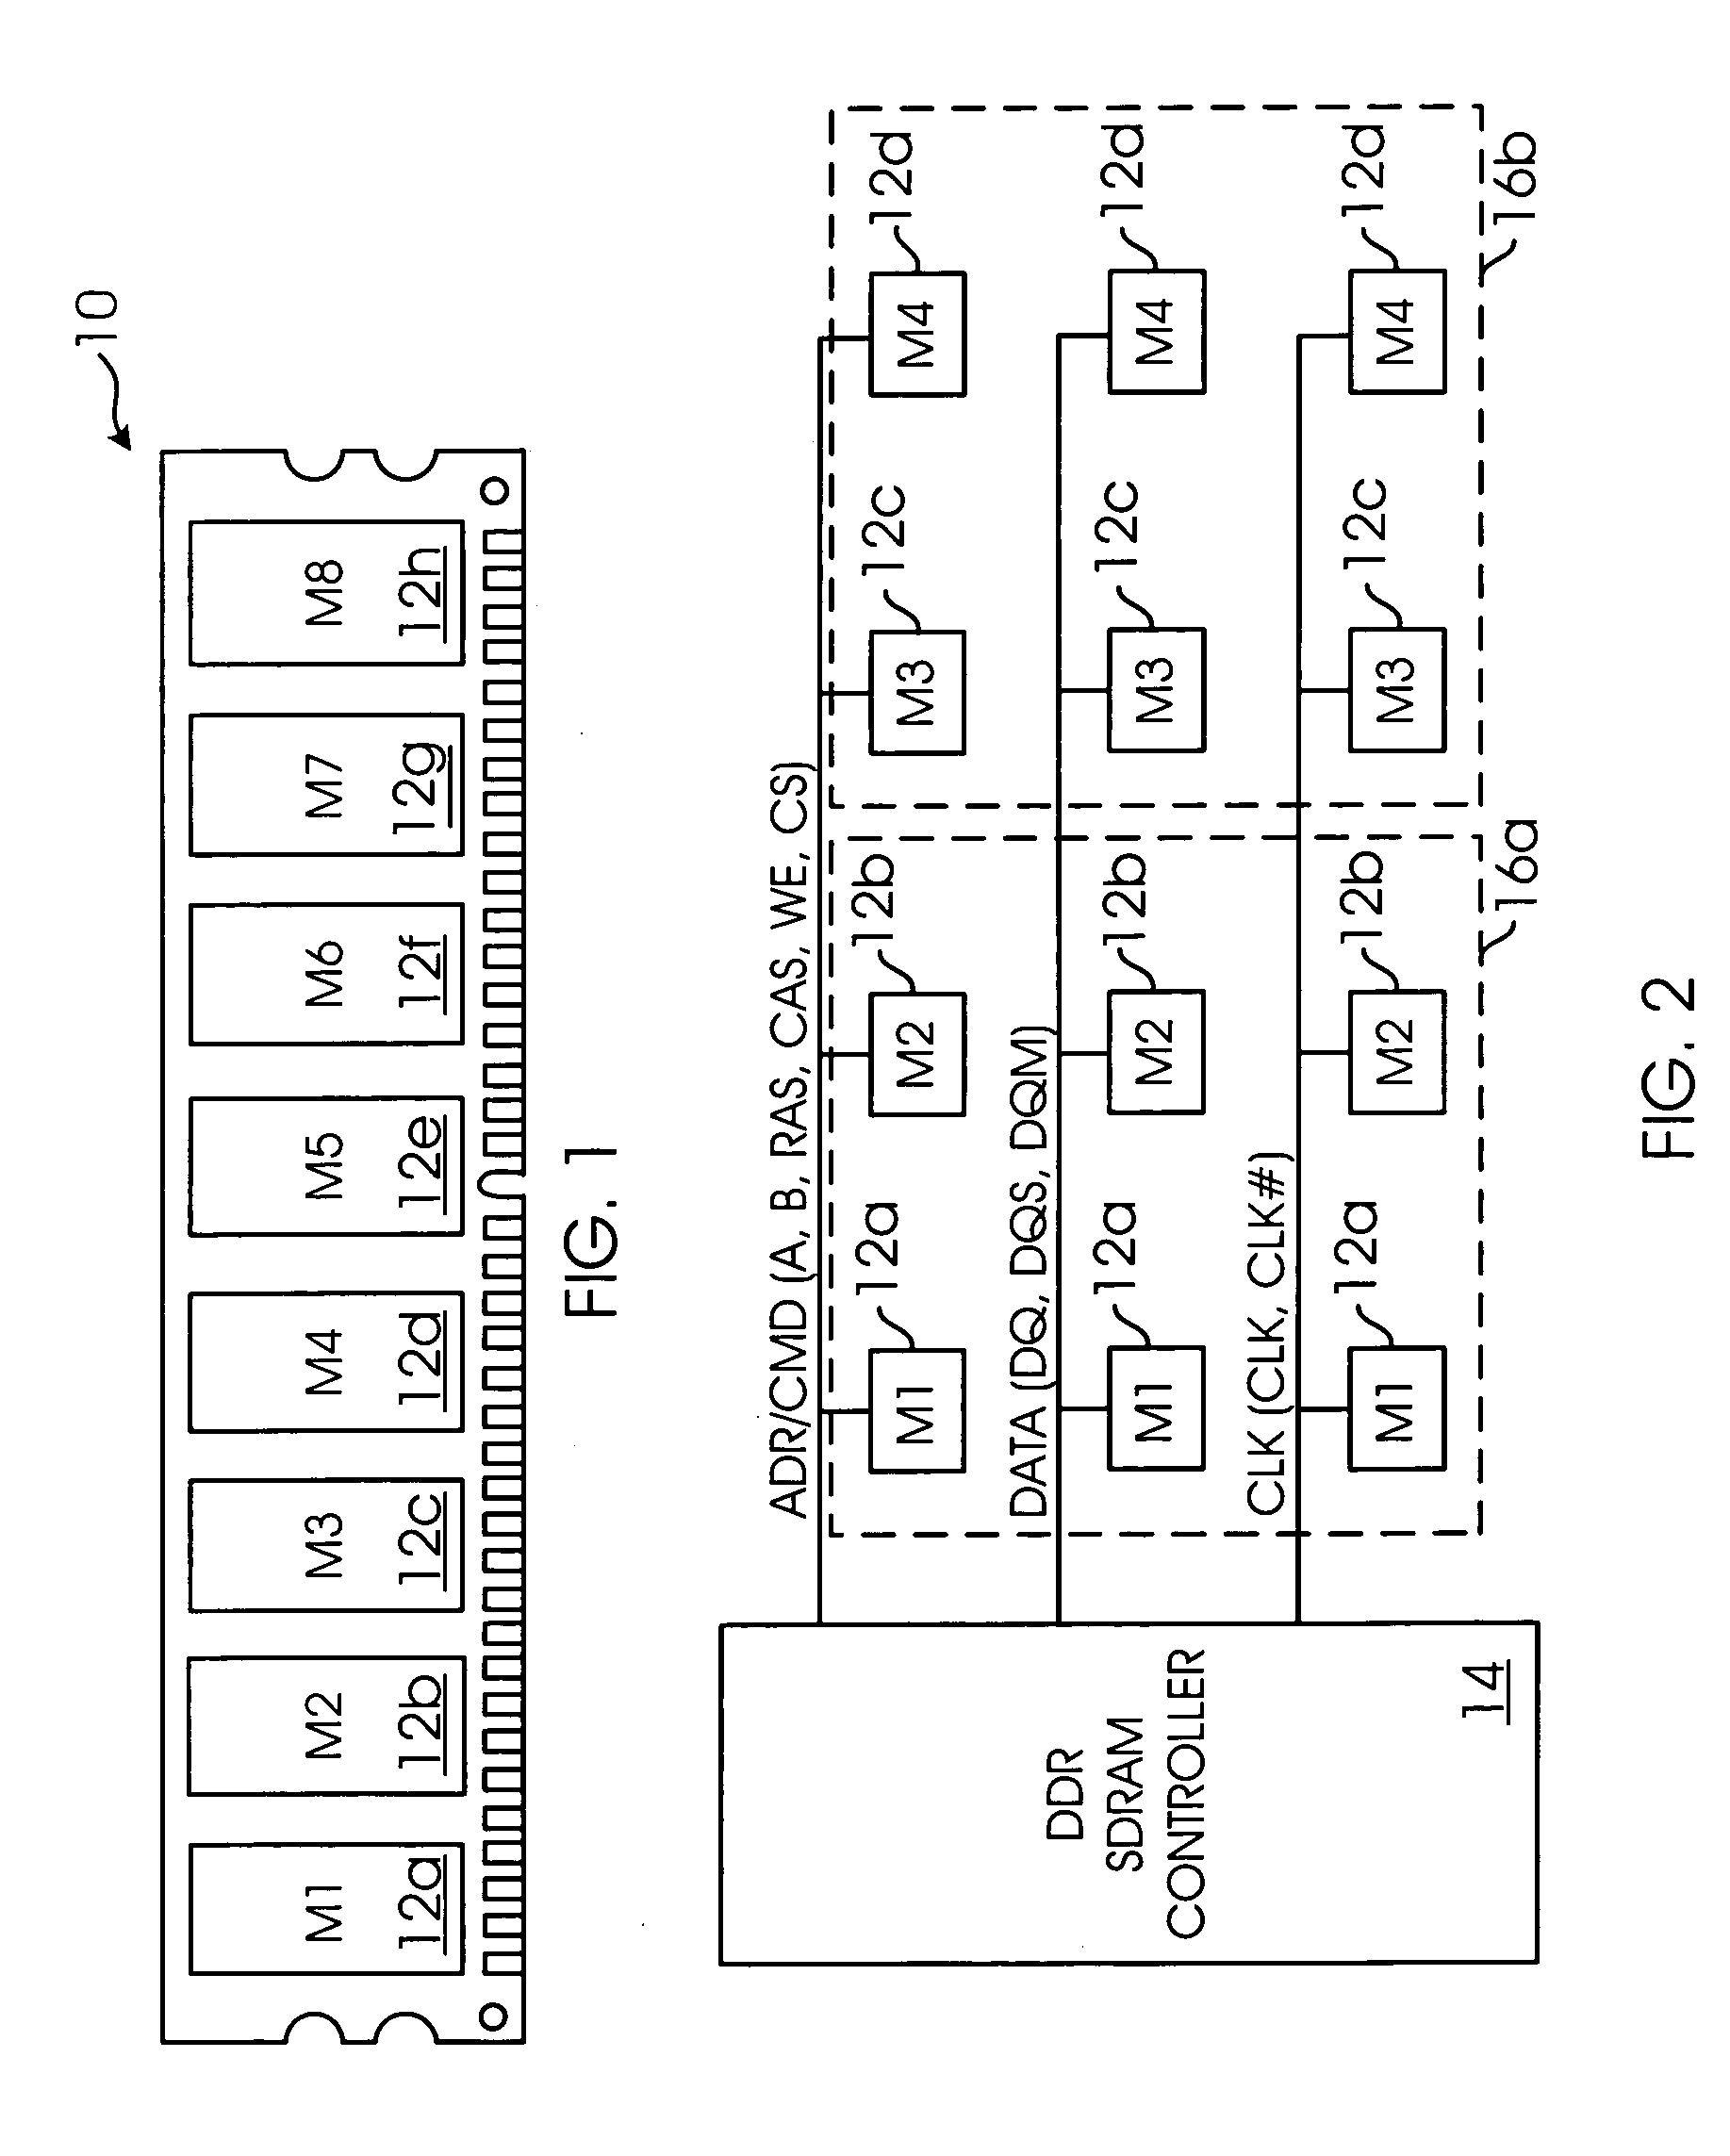 Memory module having mirrored placement of DRAM integrated circuits upon a four-layer printed circuit board